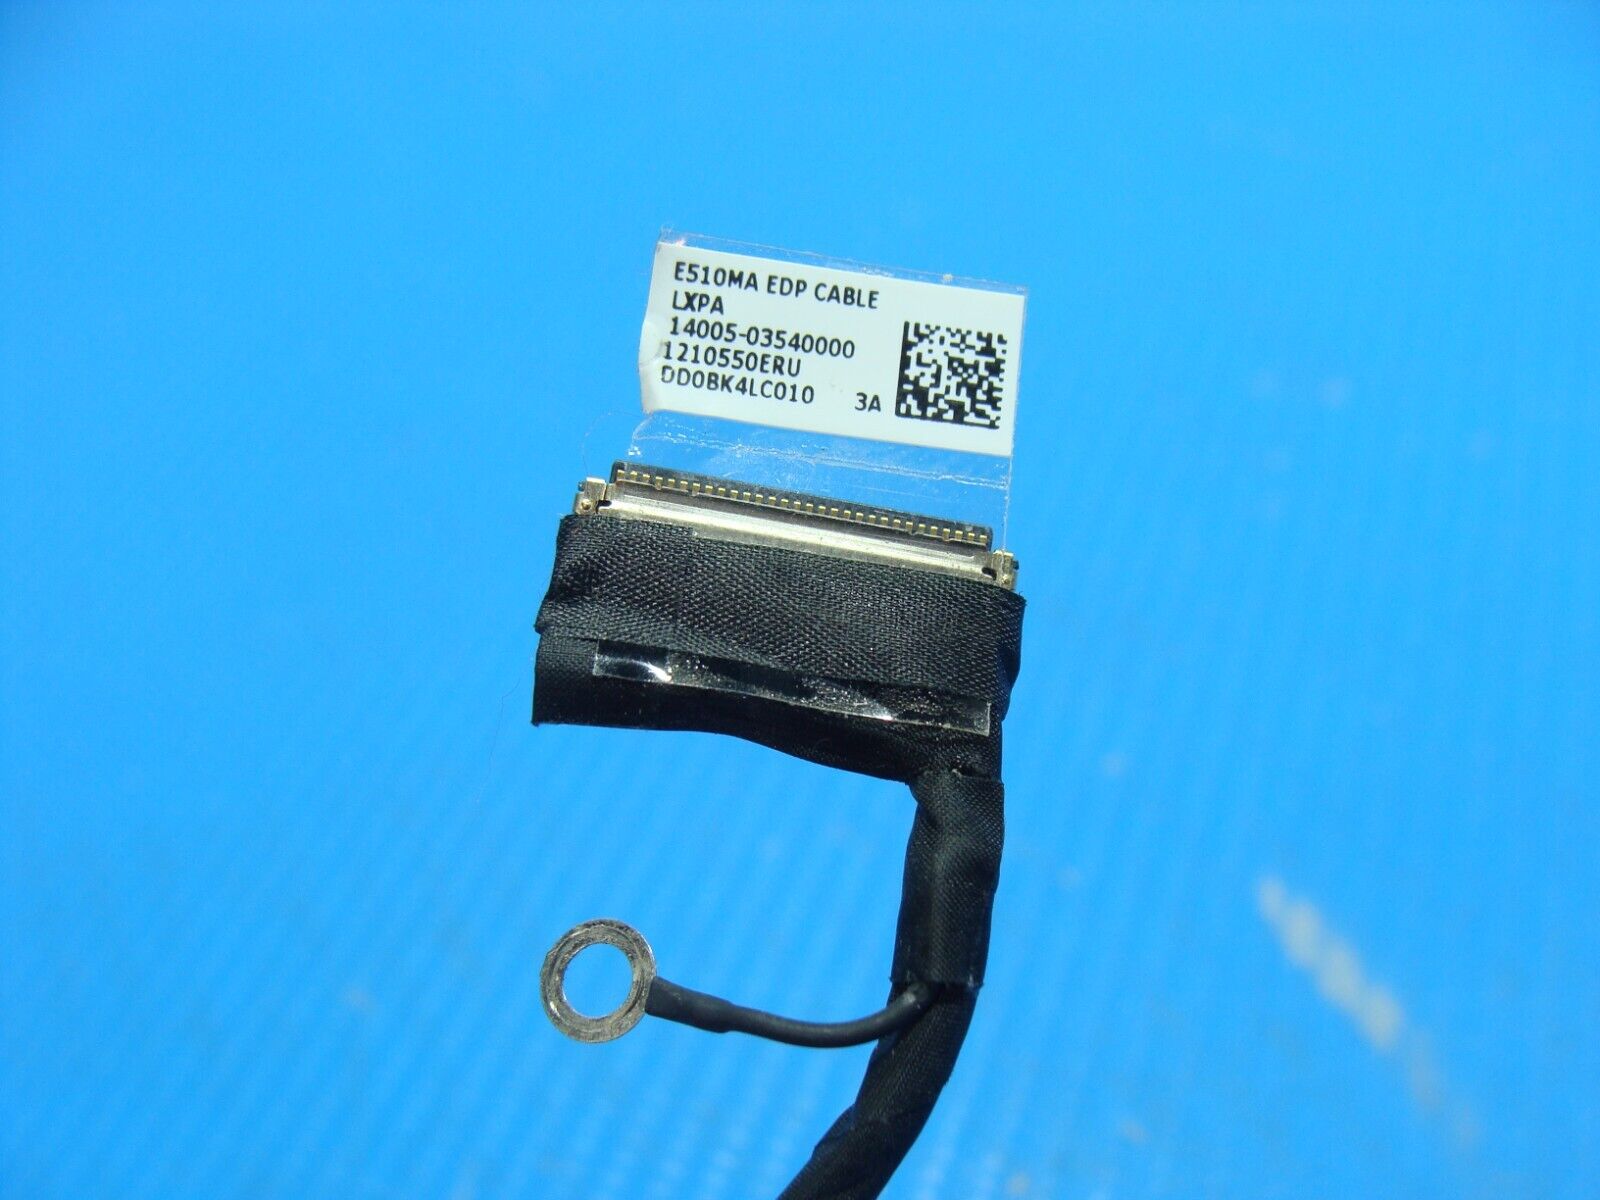 Asus VivoBook 15.6” L510MA-WB04 OEM LCD Video Cable w/WebCam 14005-03540000